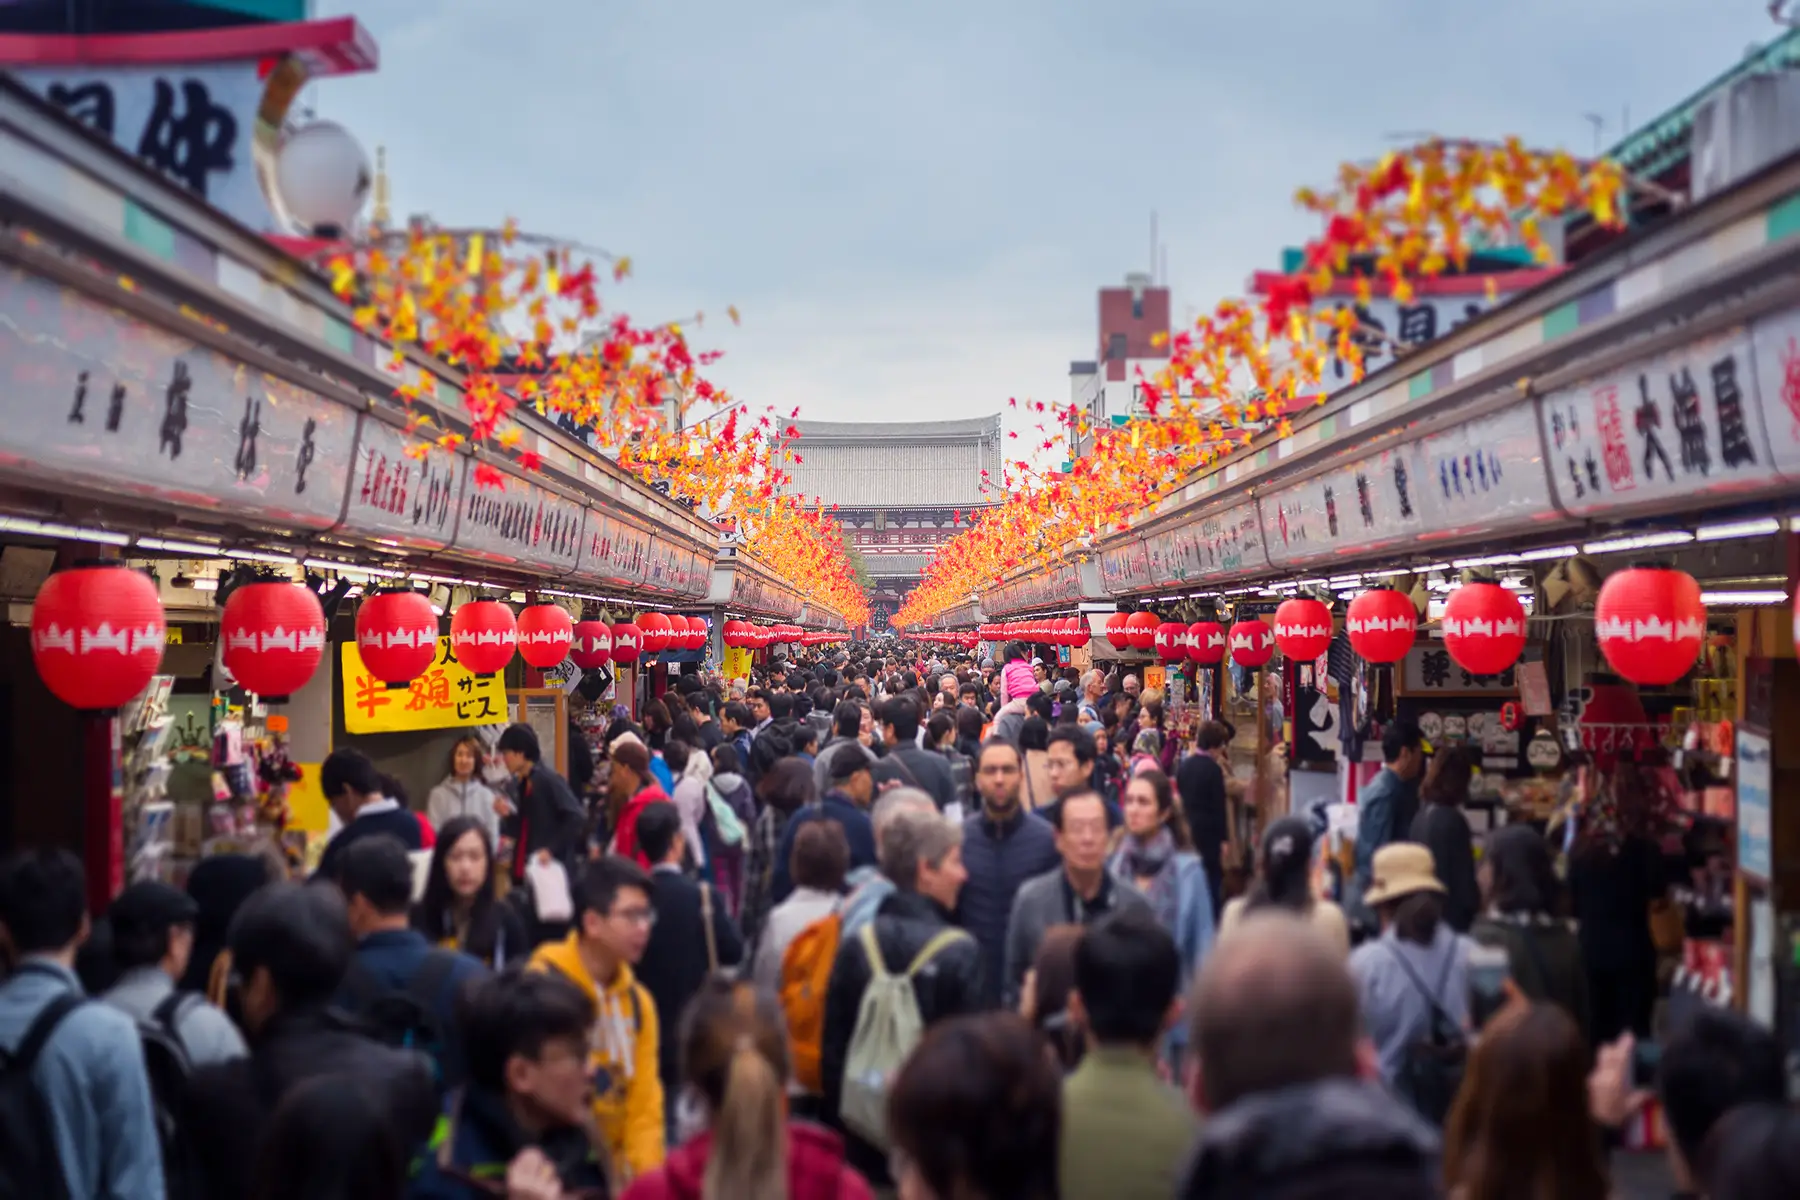 Crowds in Asakusa shopping street in Tokyo, Japan - red lanterns line the side of roofs